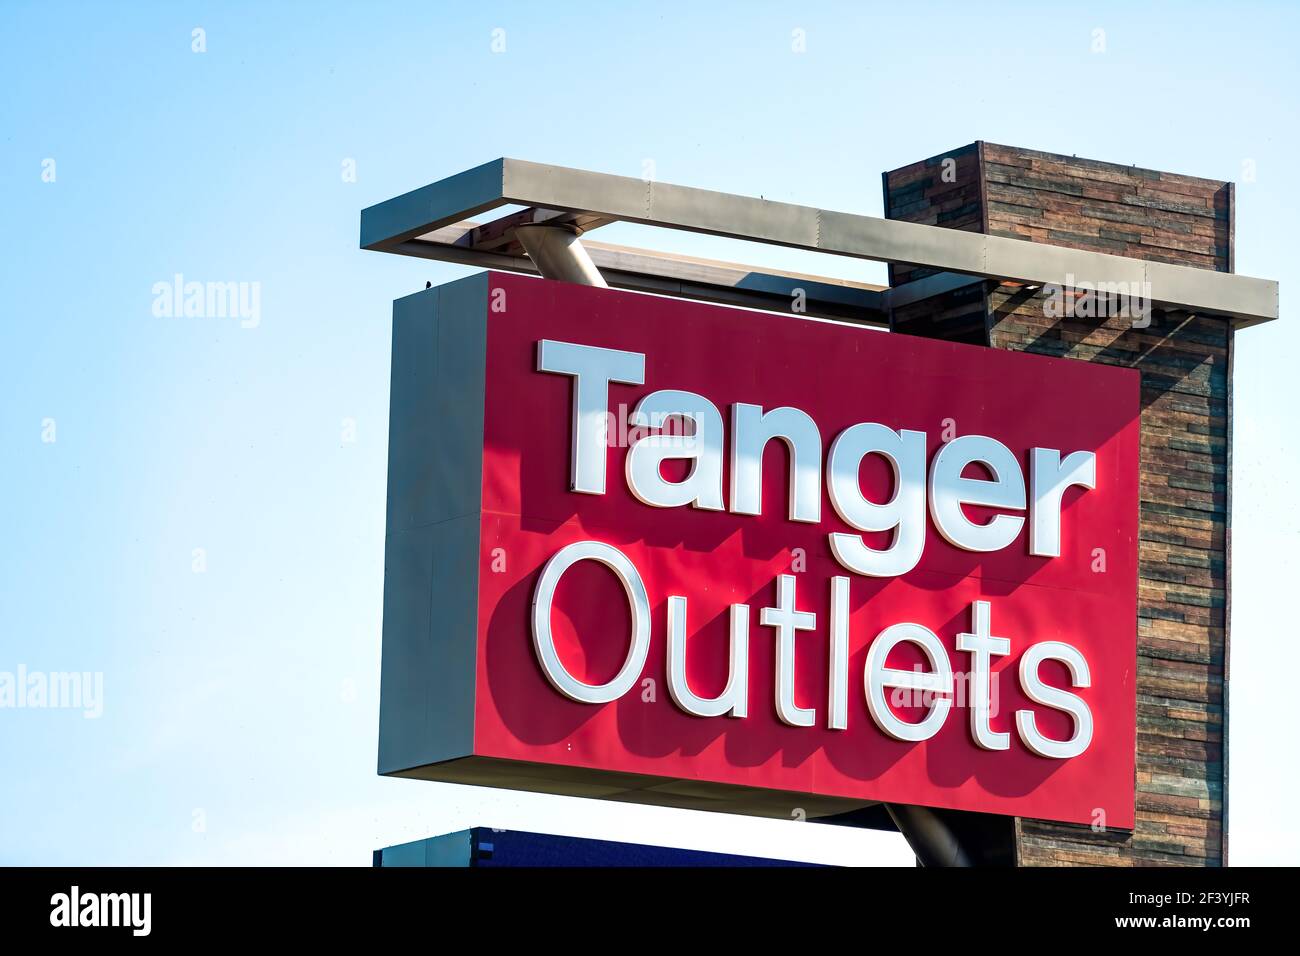 Daytona Beach, USA - May 10, 2018: Closeup of Tanger Factory Outlets shopping center retail mall sign in Florida city town with designer stores shops Stock Photo